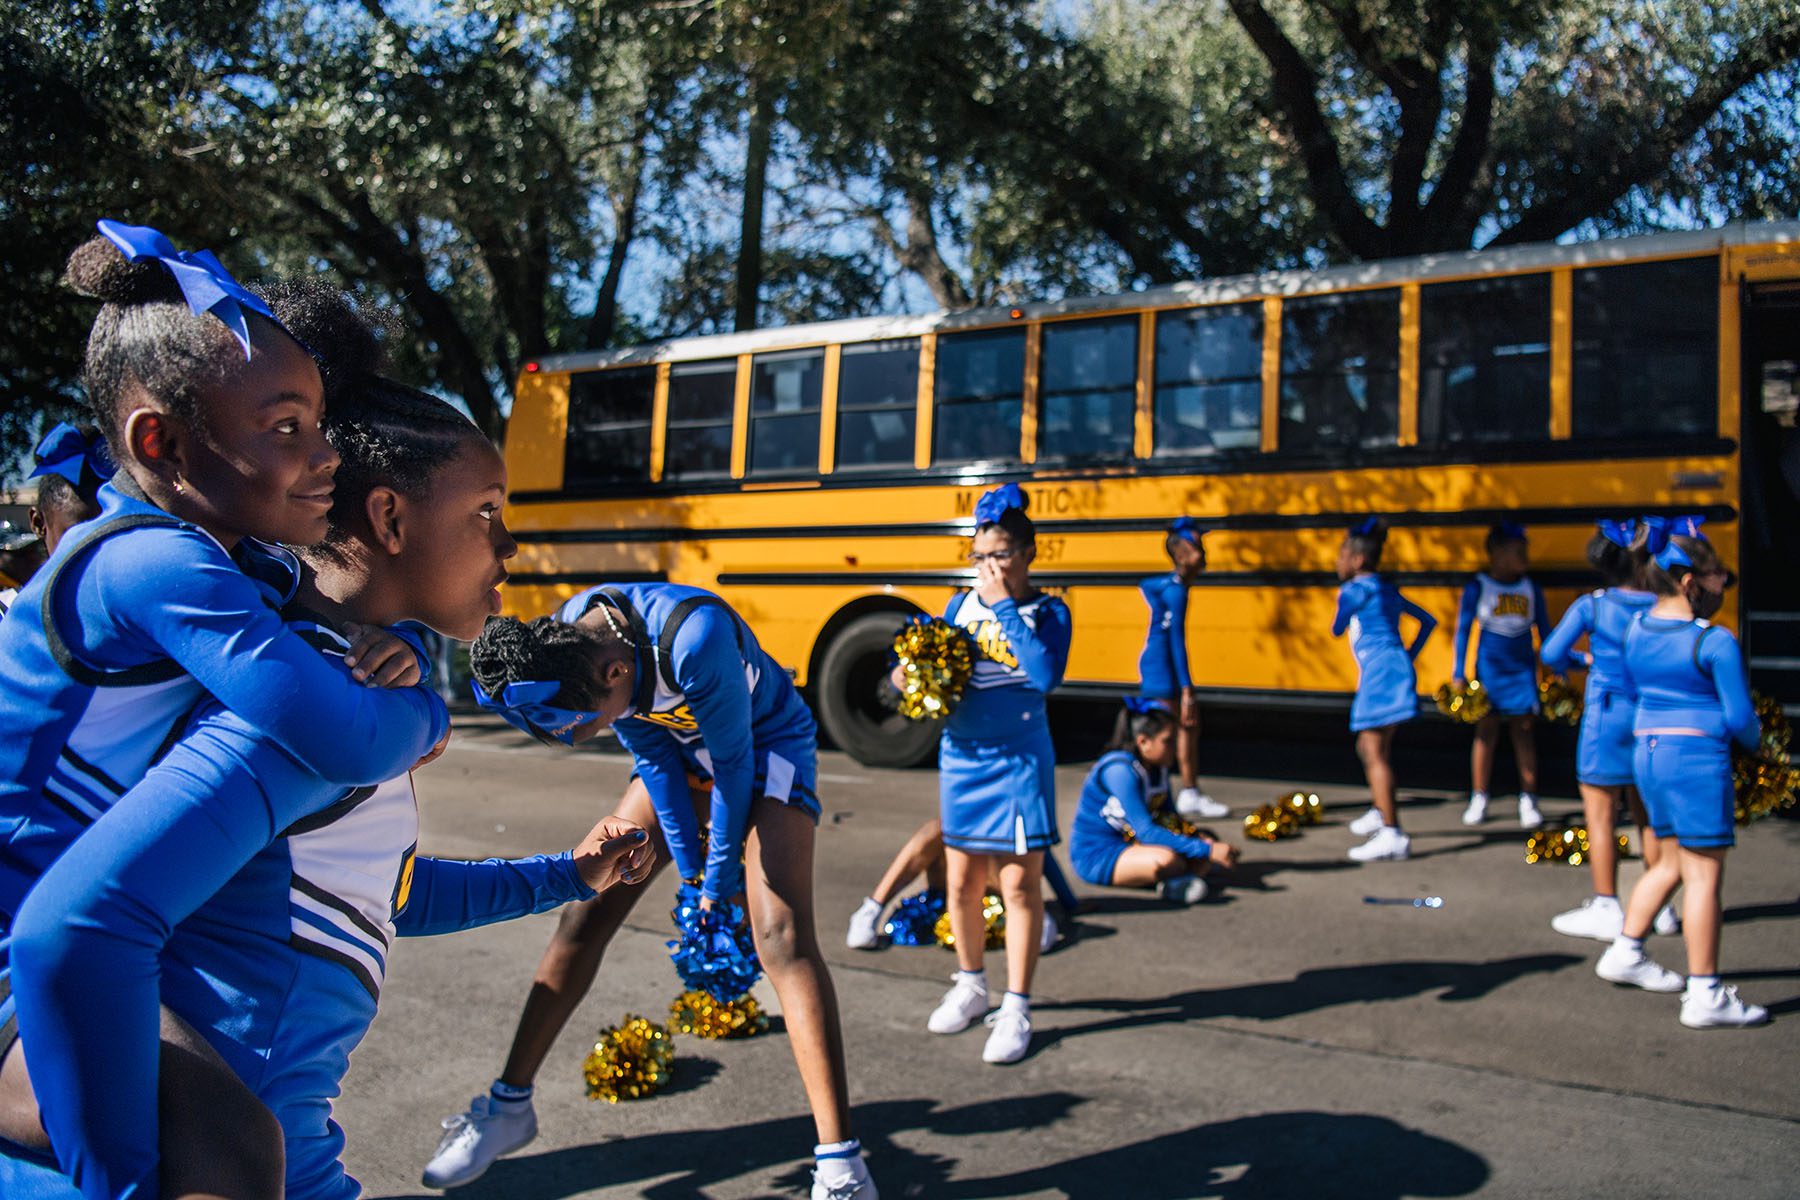 Young cheerleaders in blue uniforms, ribbons and golden pom-poms stretch and play before boarding a school bus.